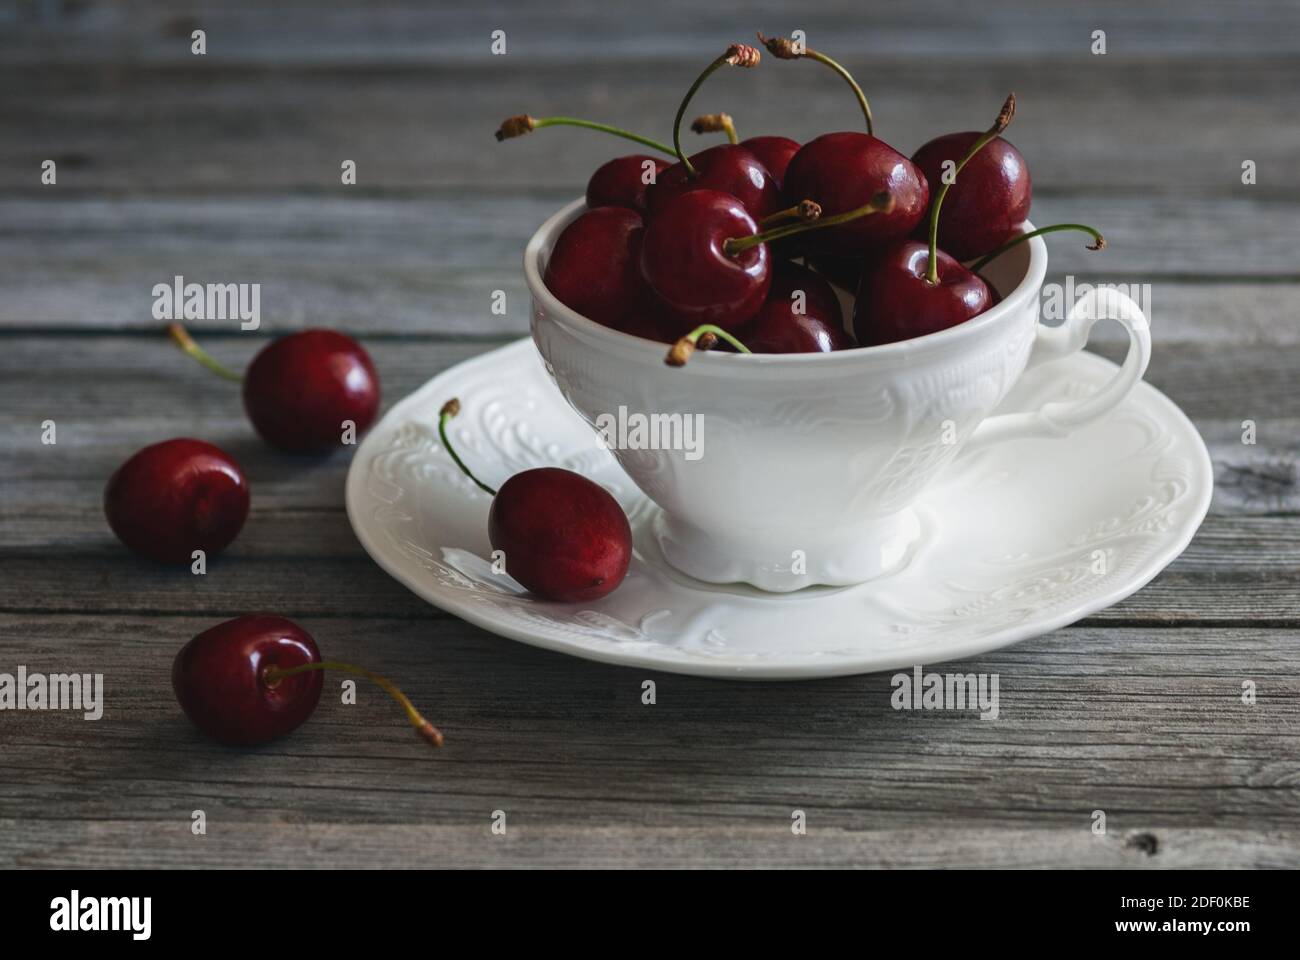 red cherries in white tea cup on aged wooden background, fruit still life Stock Photo